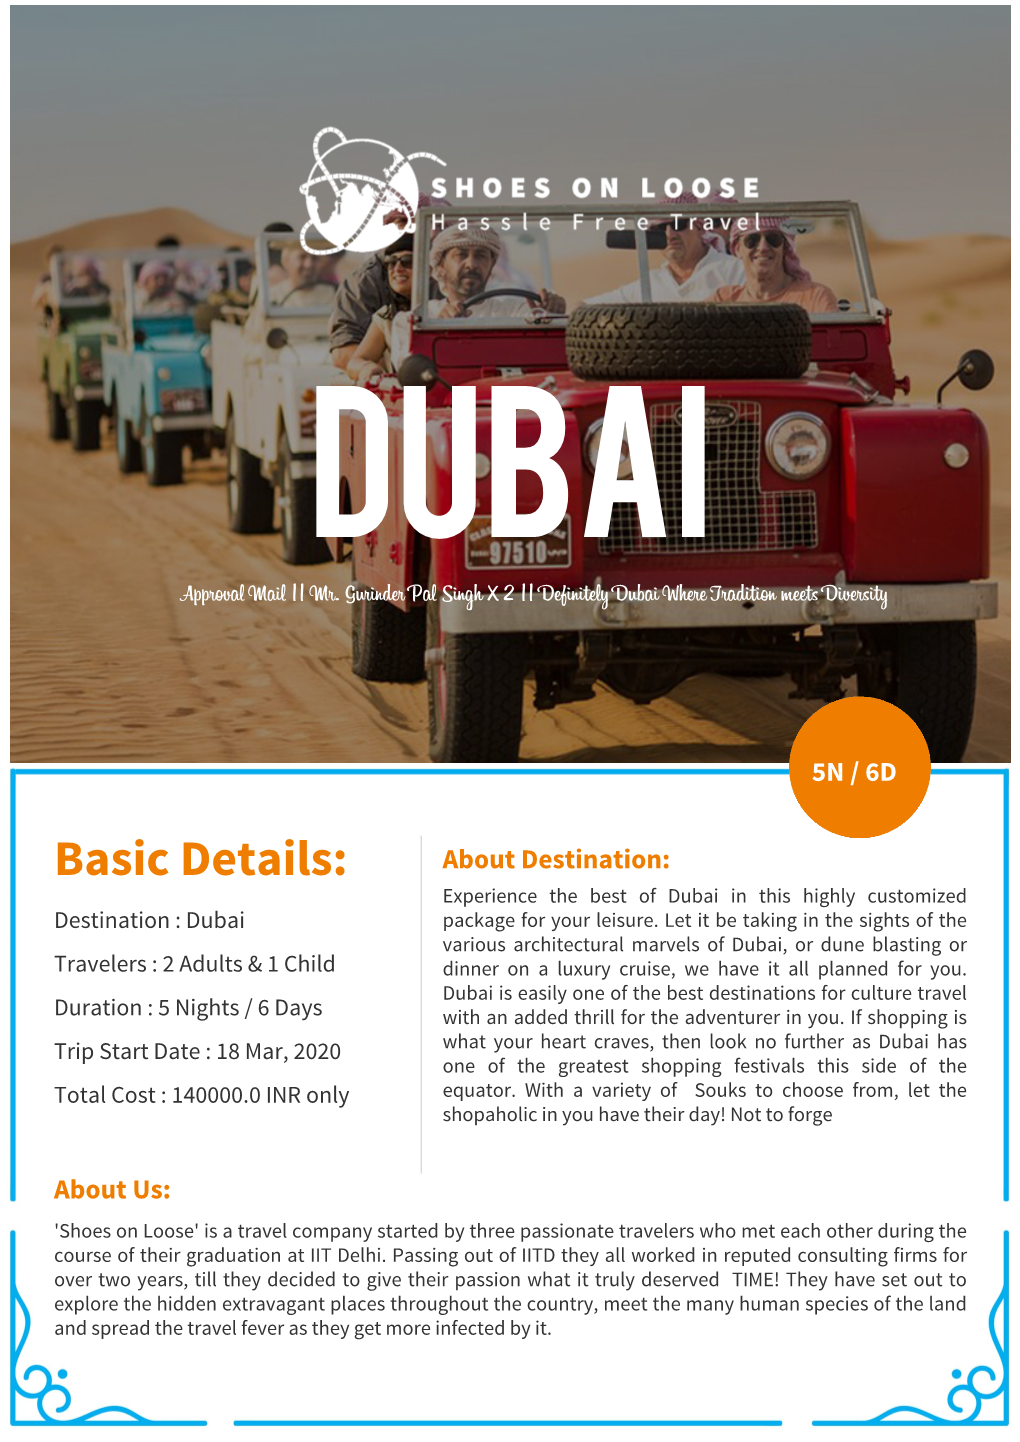 Approval Mail Mr. Gurinder Pal Singh X 2 Definitely Dubai Where Tradition Meets Diversity Itinerary 1.Pdf